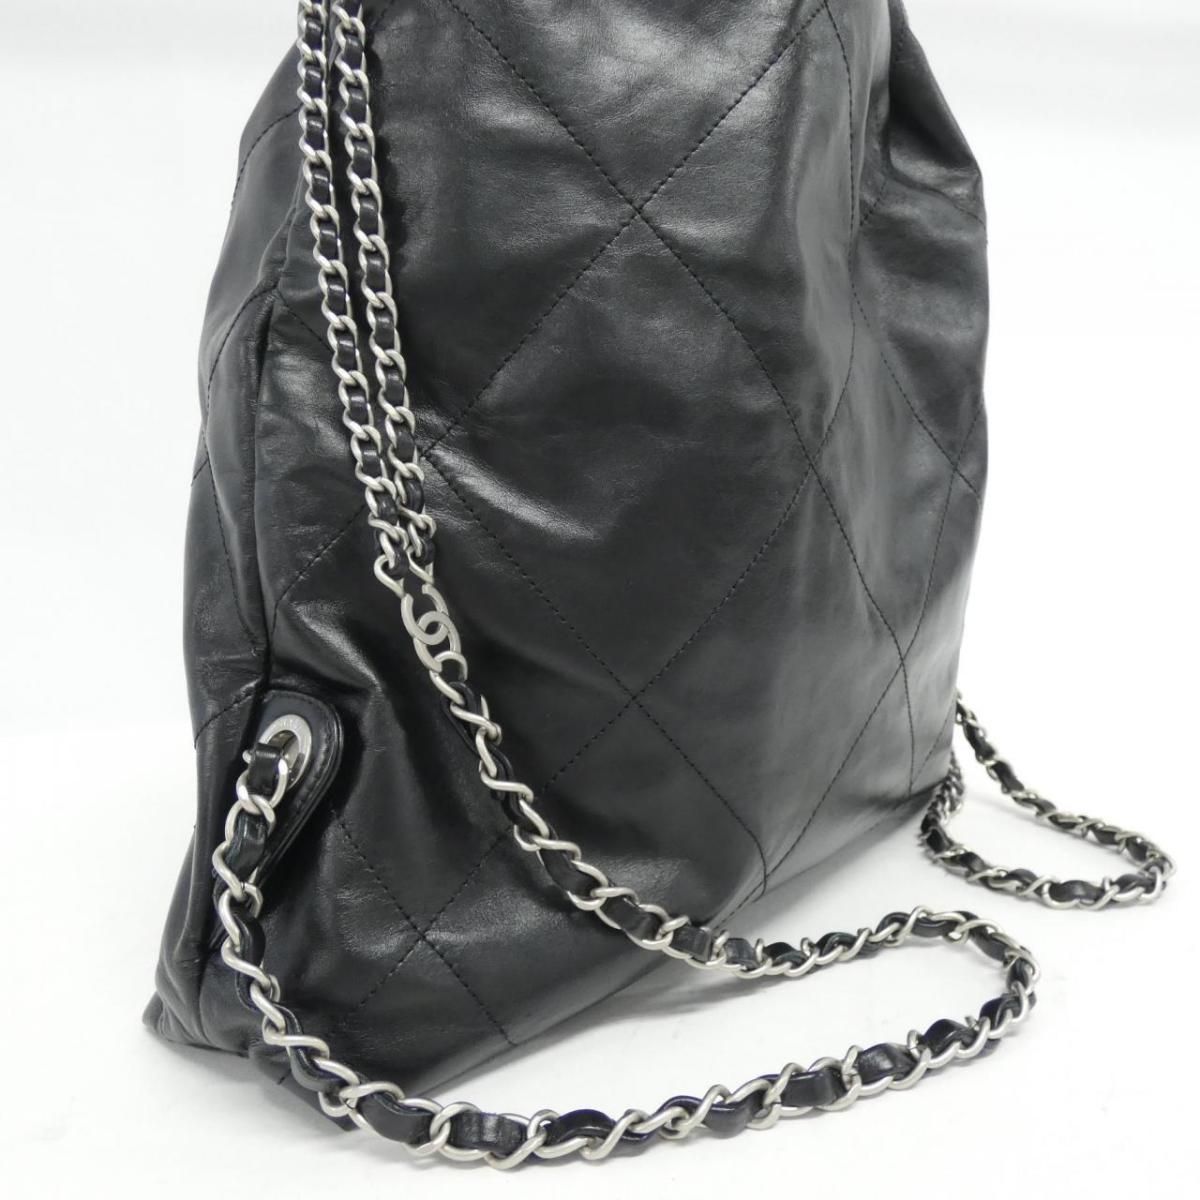 Chanel 22 Line AS3313 Rucksack